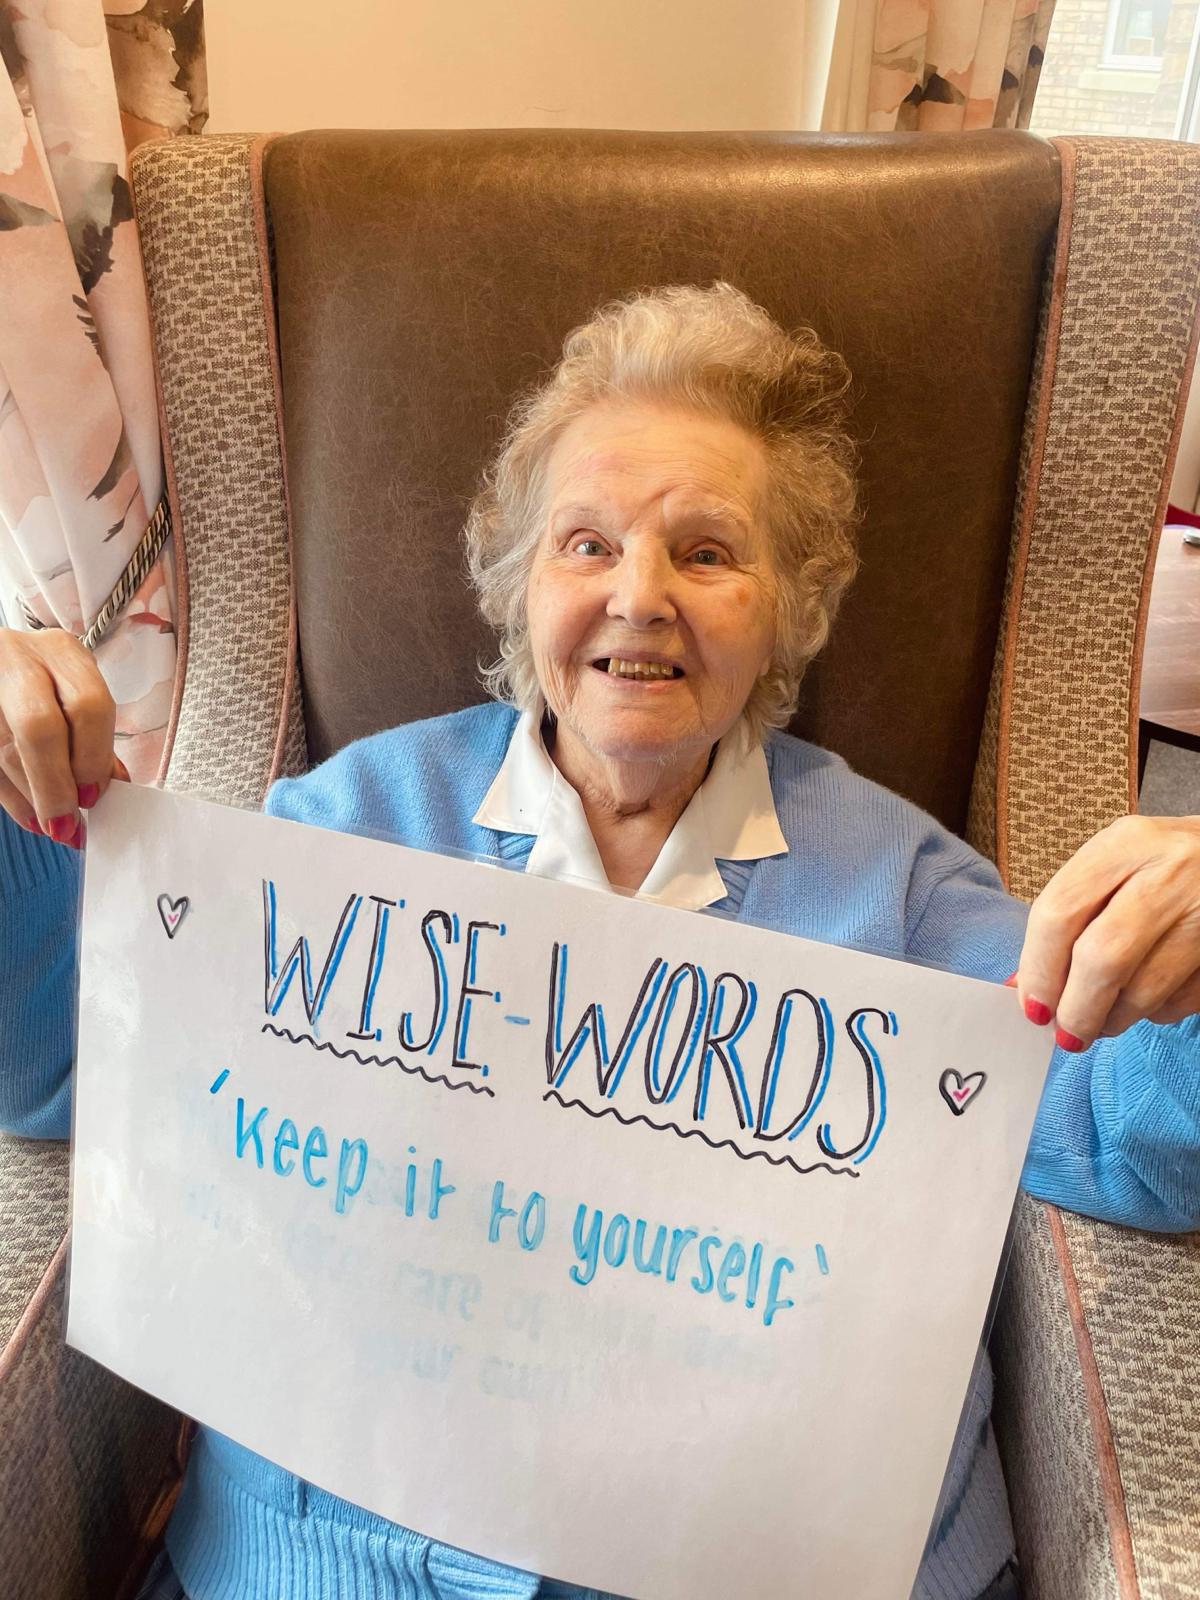 An image of a Hessle resident at St Mary's Riverside, where the residents shared some wise words.